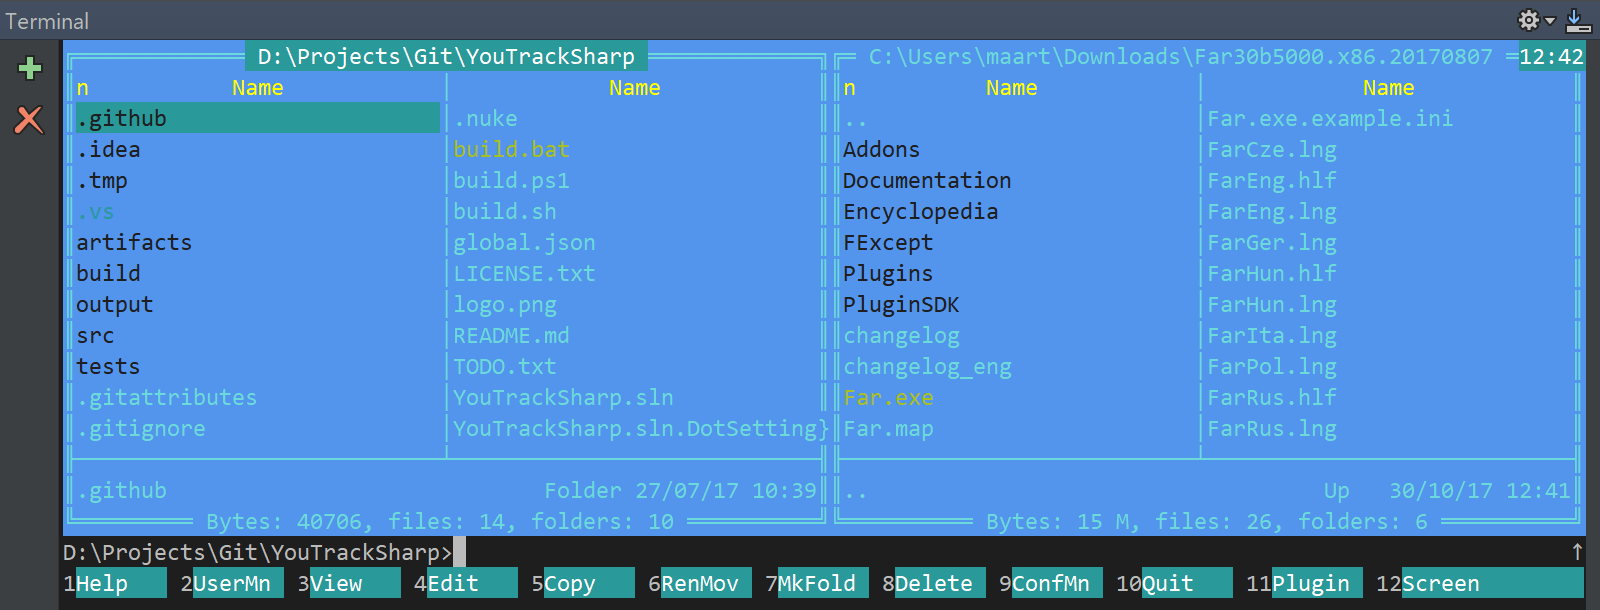 Using Far Manager in the JetBrains Rider's terminal emulator